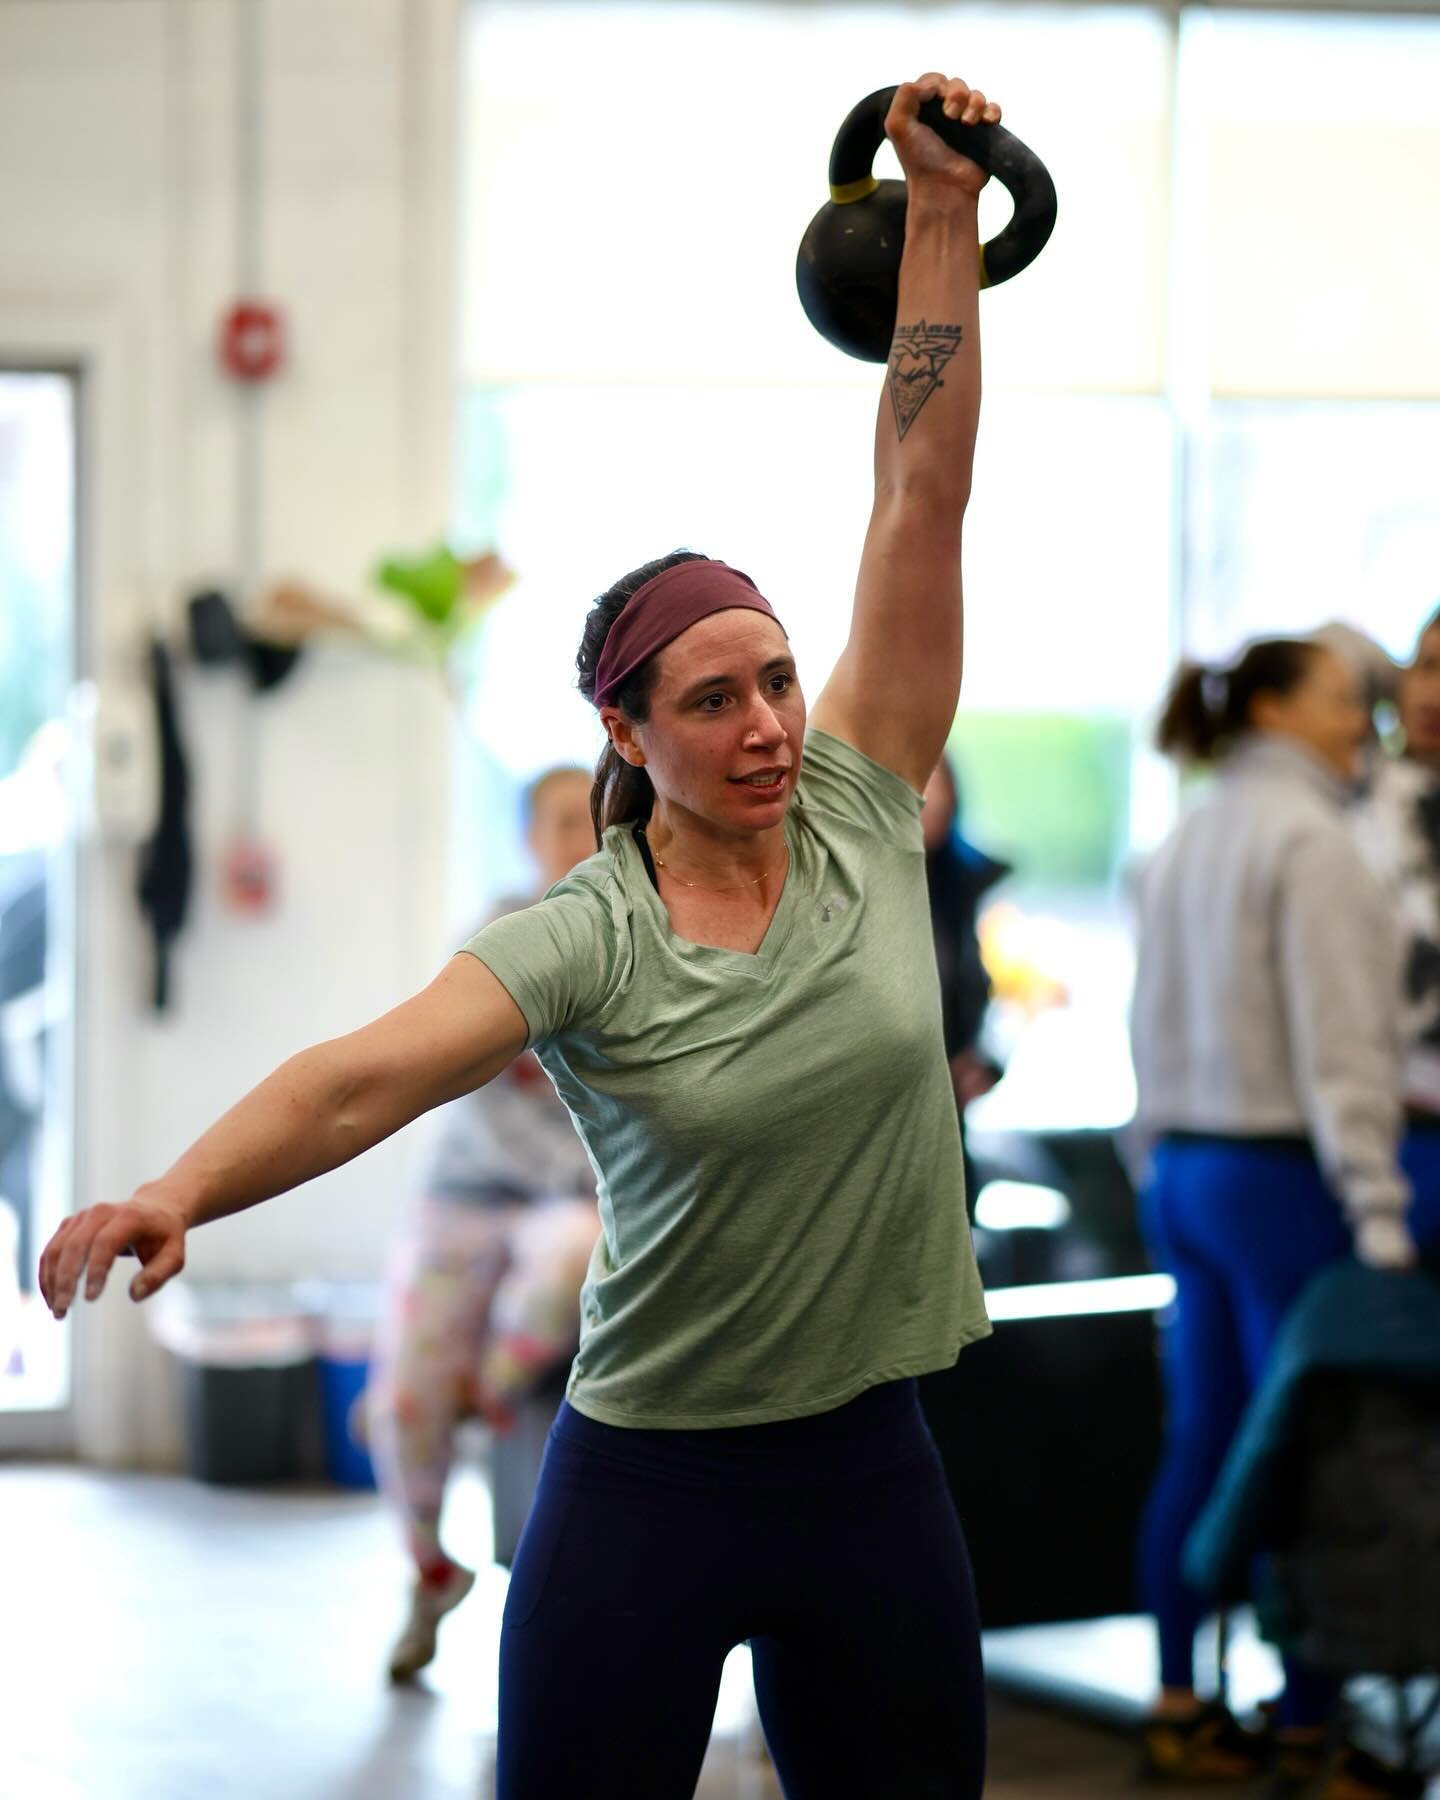 If you continuously compete with others, you become bitter.  But, if you continuously compete with yourself, you become better.  #crossfit #lifechangingfitness #cfsdstrong #blaskobuilt #hardworkearnsrespect #ifitdoesntchallengeyouitdoesntchangeyou  #